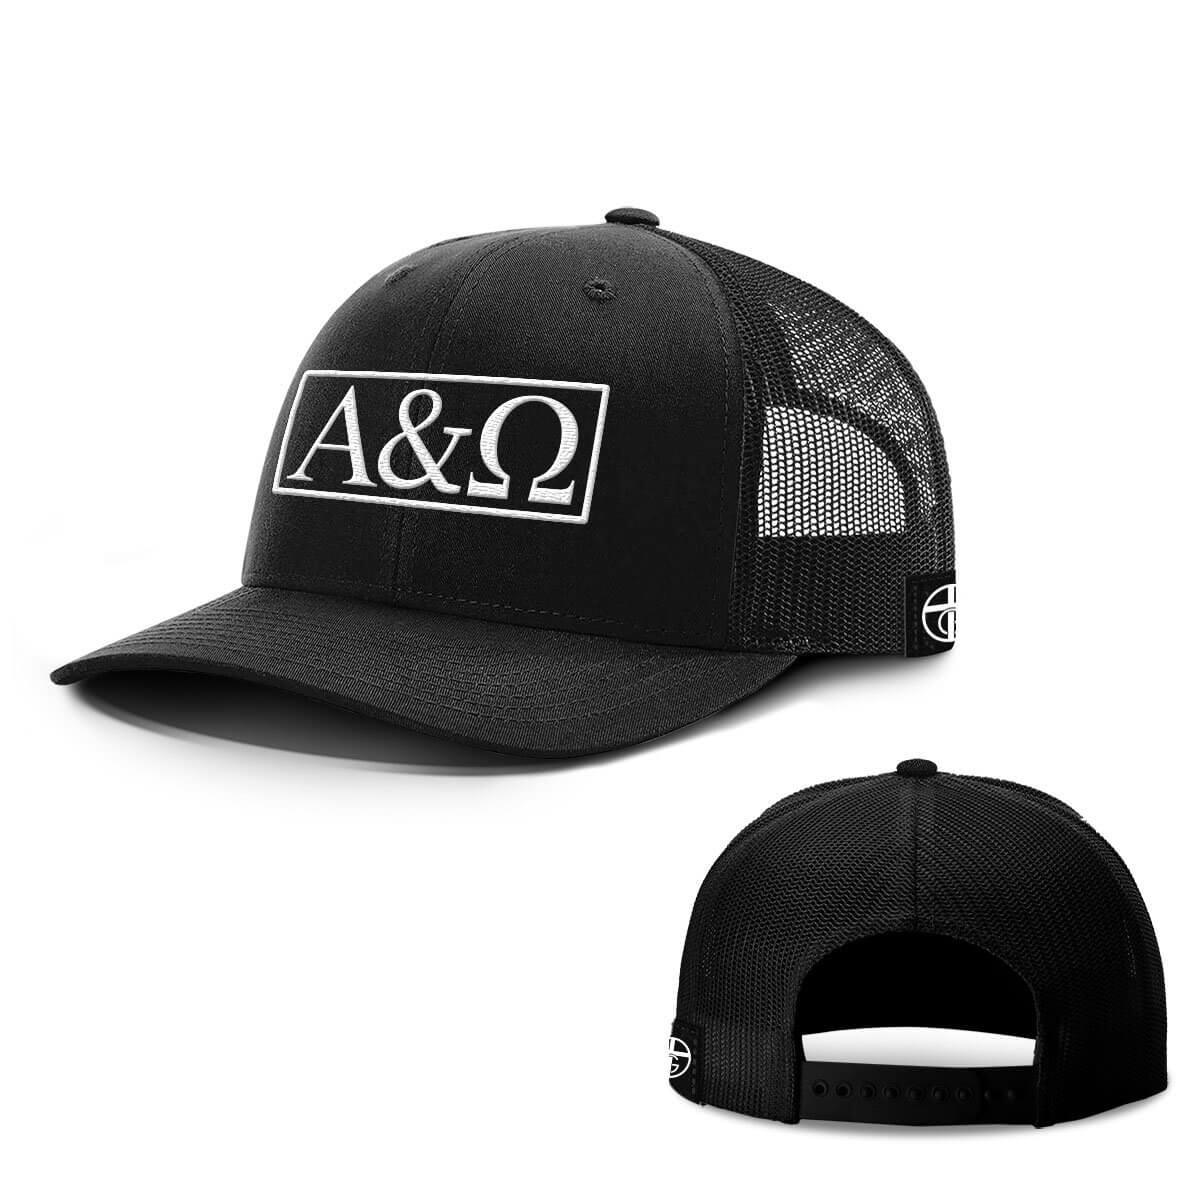 The Alpha and Omega Hats